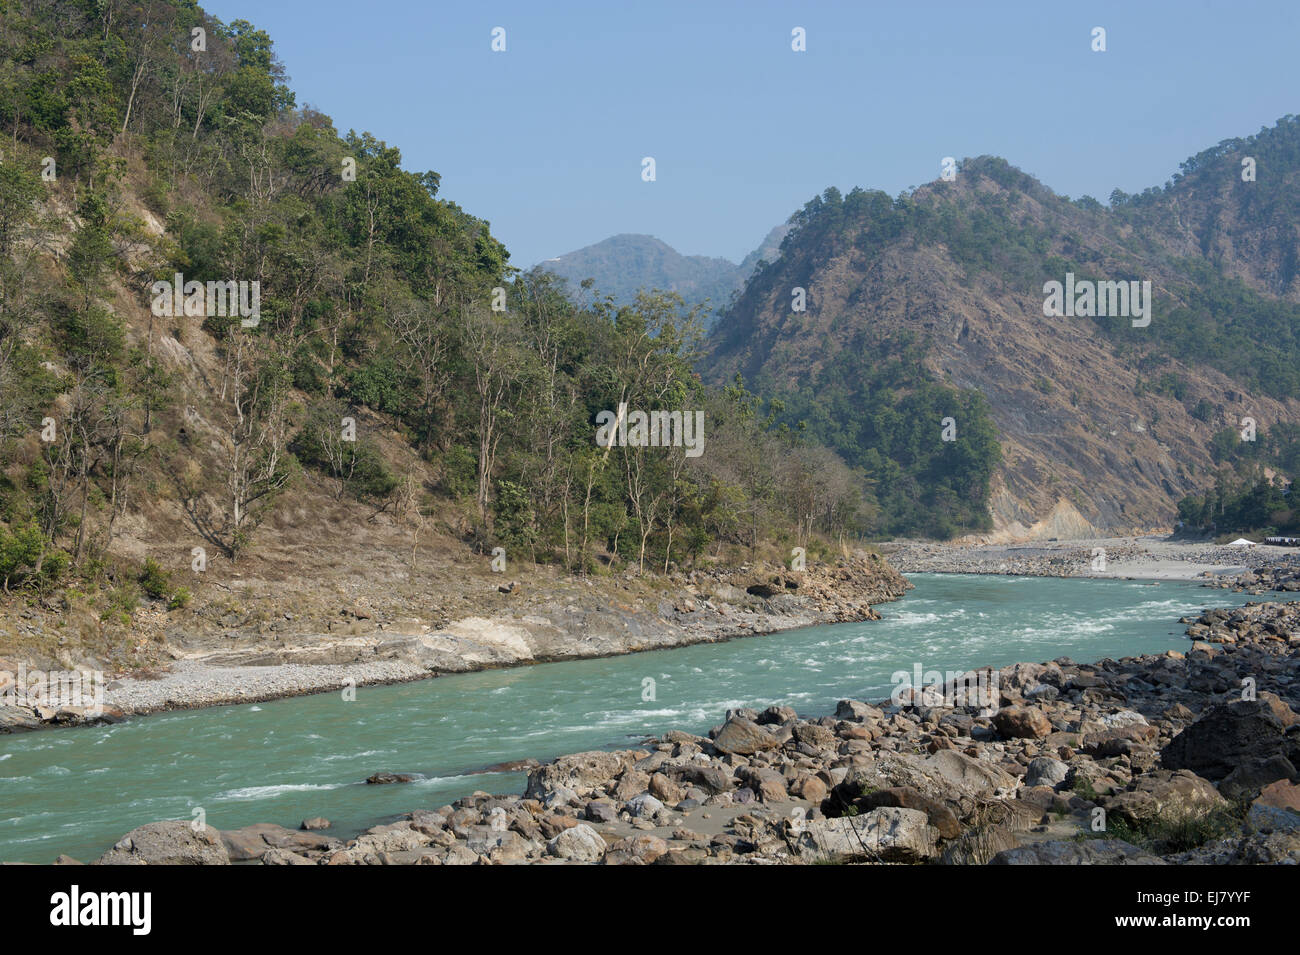 The Ganges(Ganga) river  flowing through the foothills of the Himalayas just outside Rishikesh, Uttarakhand, India Stock Photo